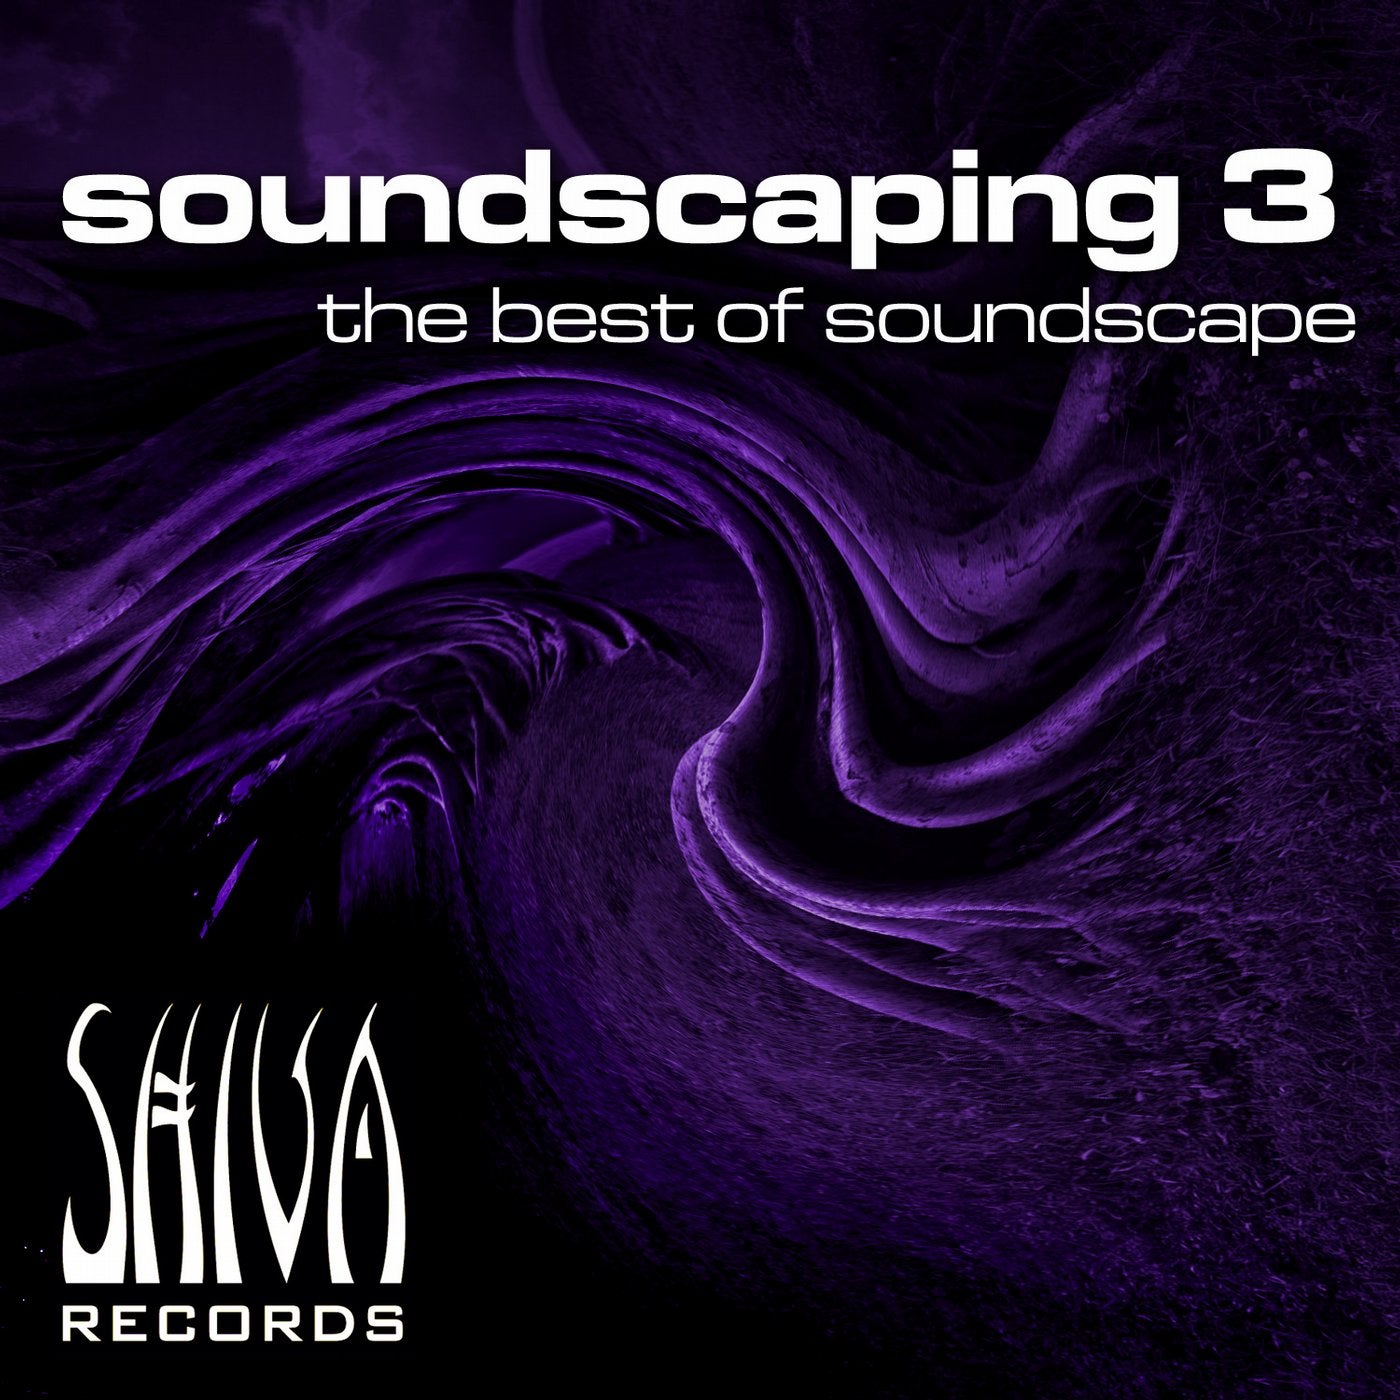 Soundscaping 3